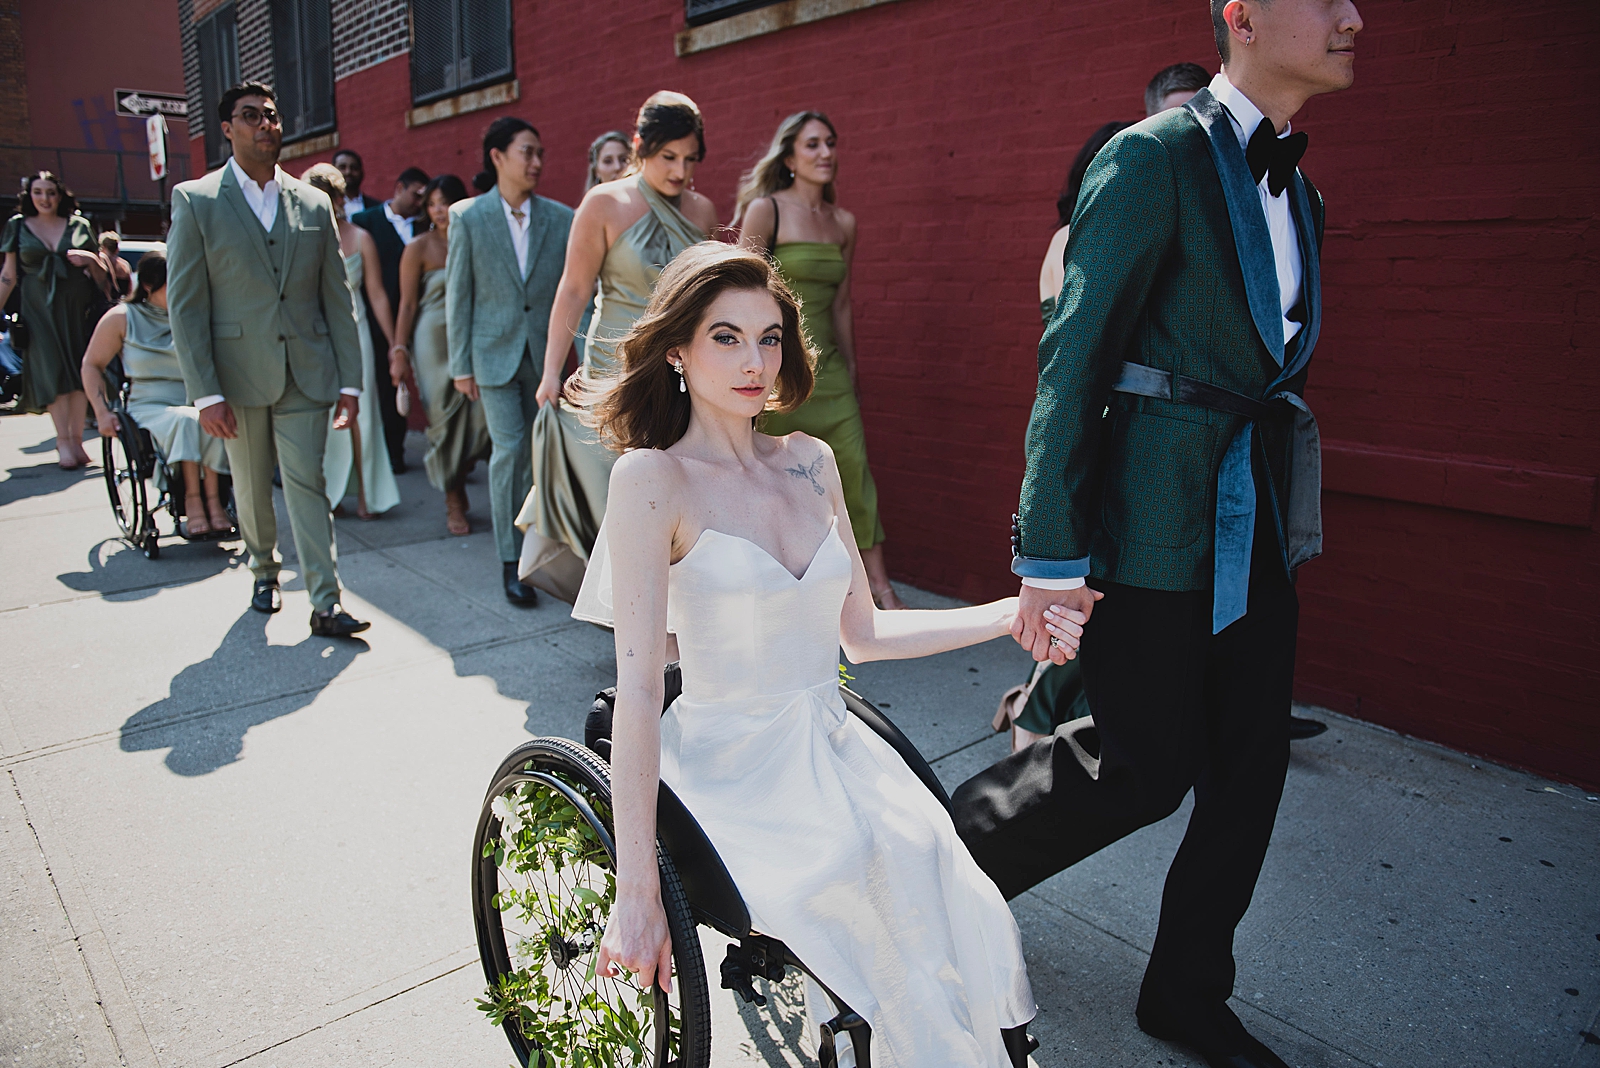 Shot of the bride and groom holding hands as they move down a sidewalk with their bridal party behind them. 